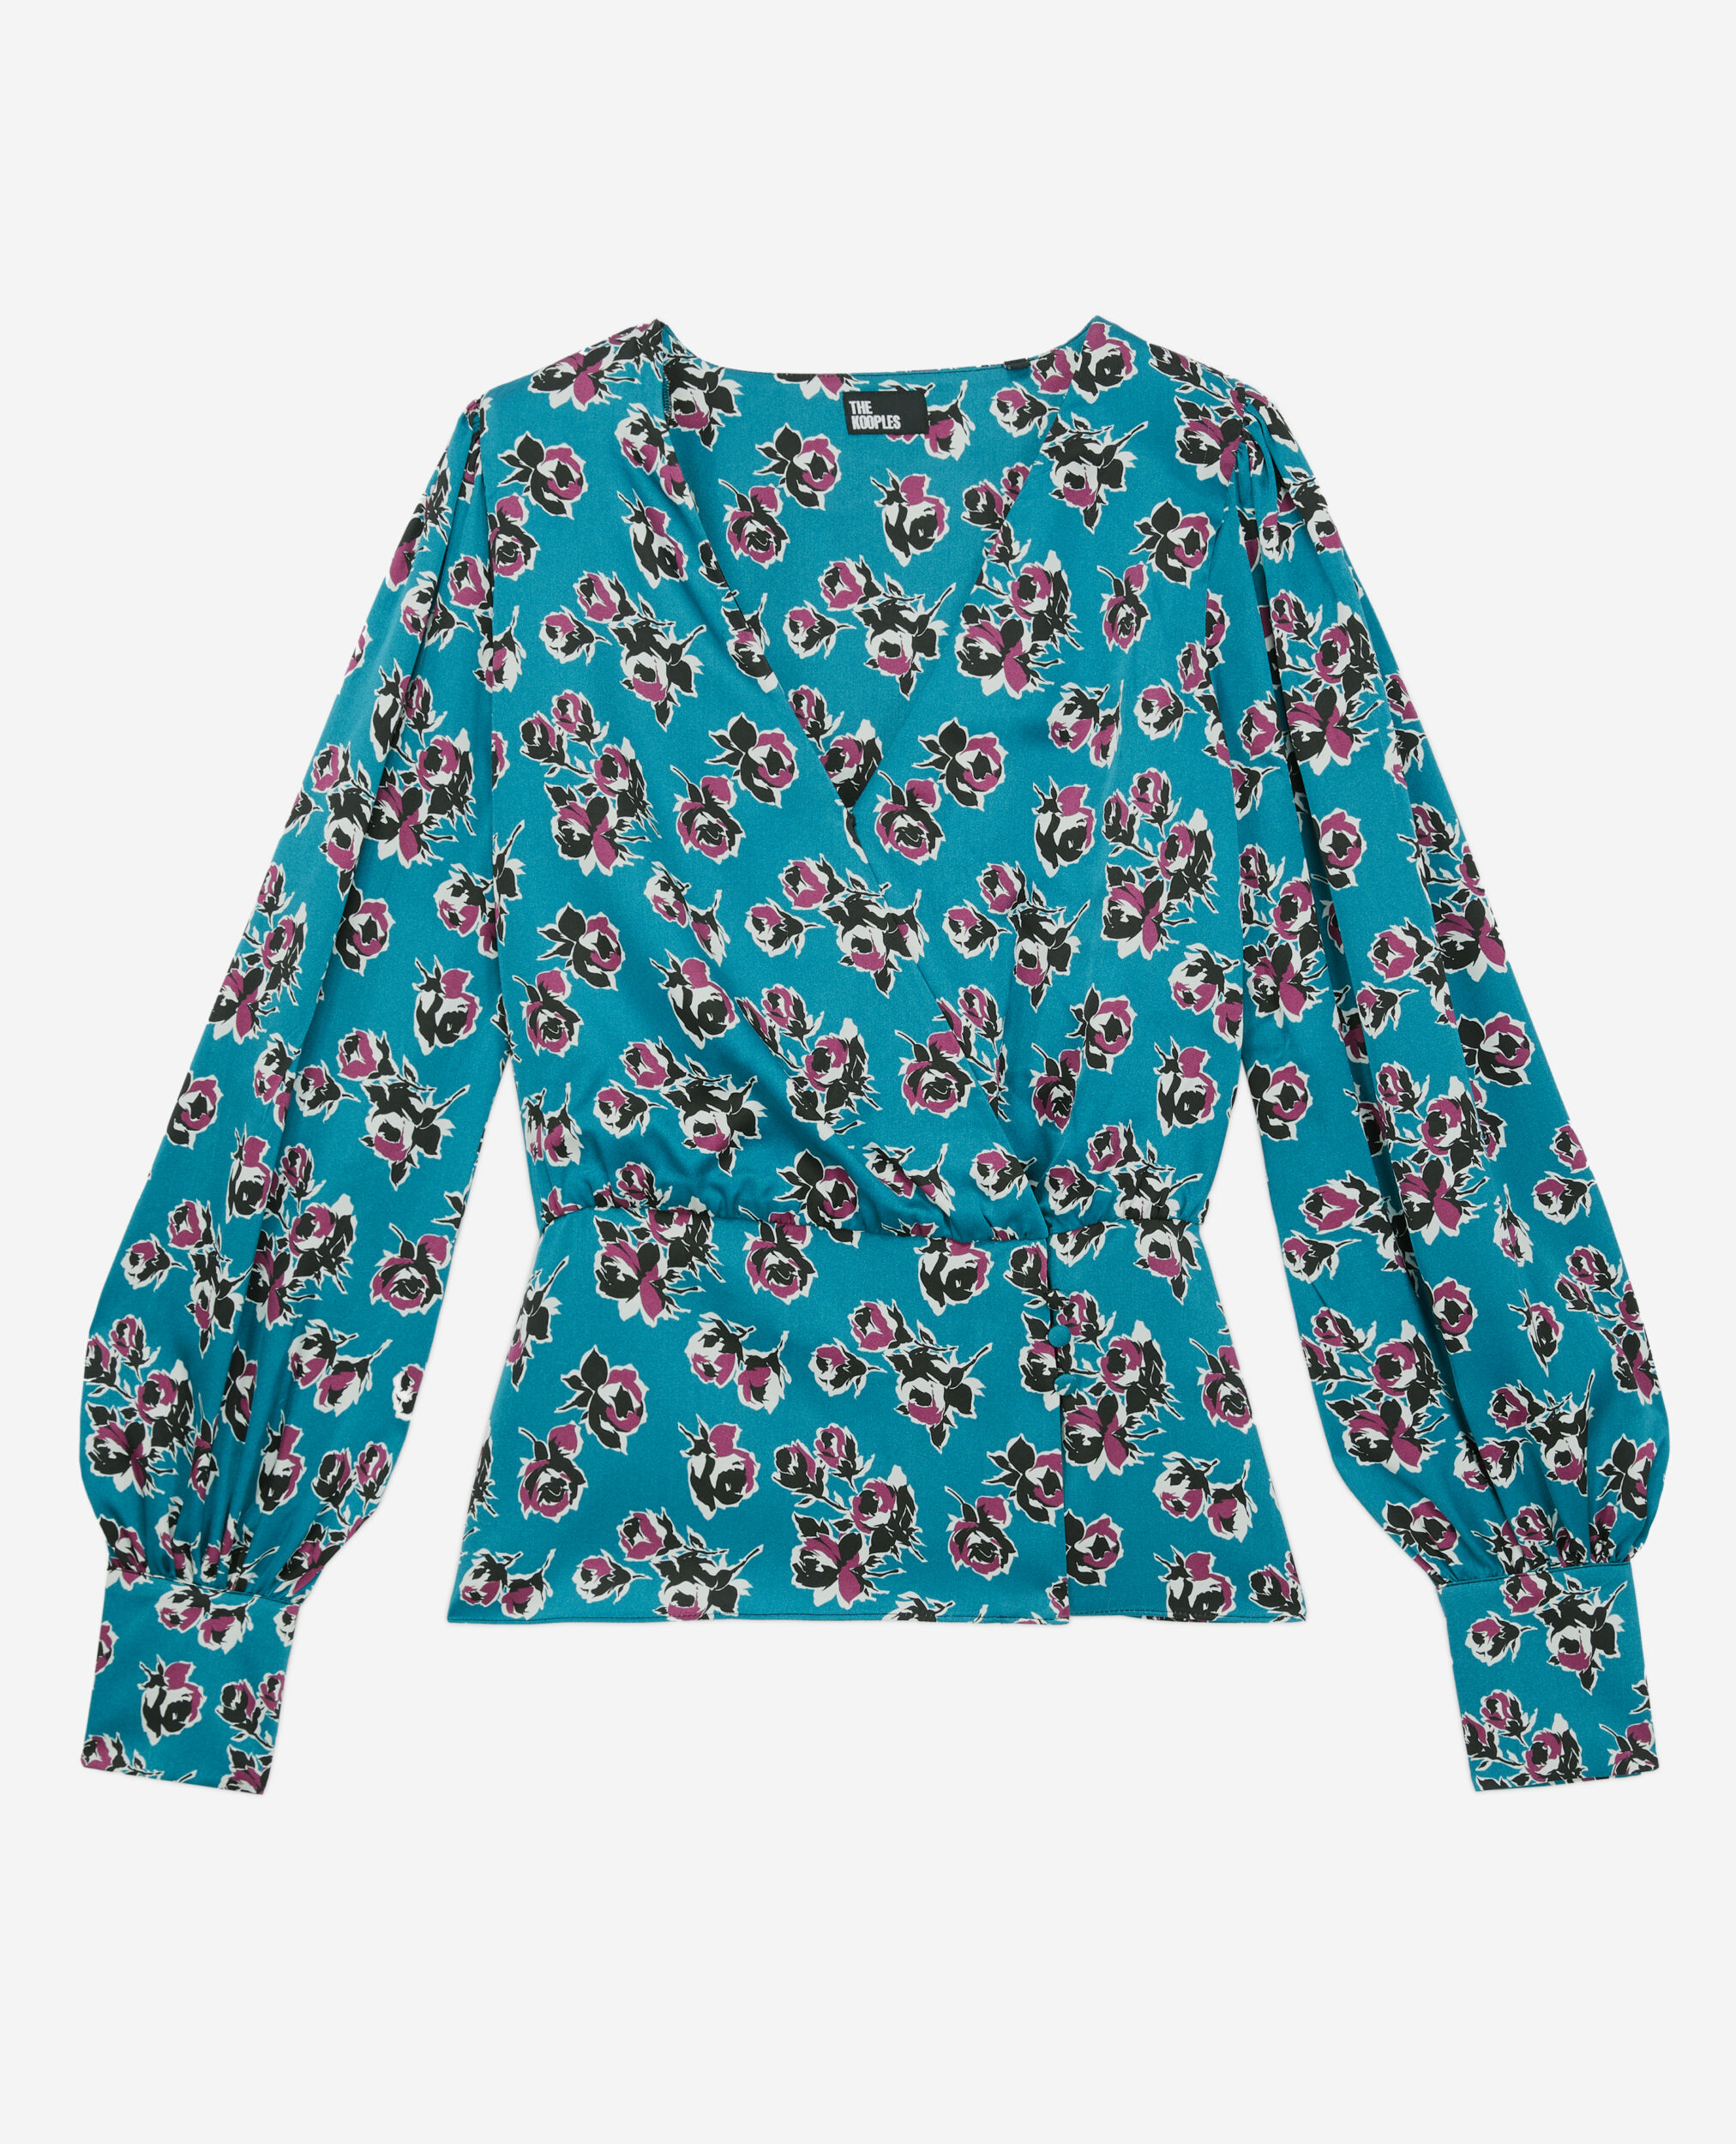 Crossover printed top, PINK - BLUE, hi-res image number null